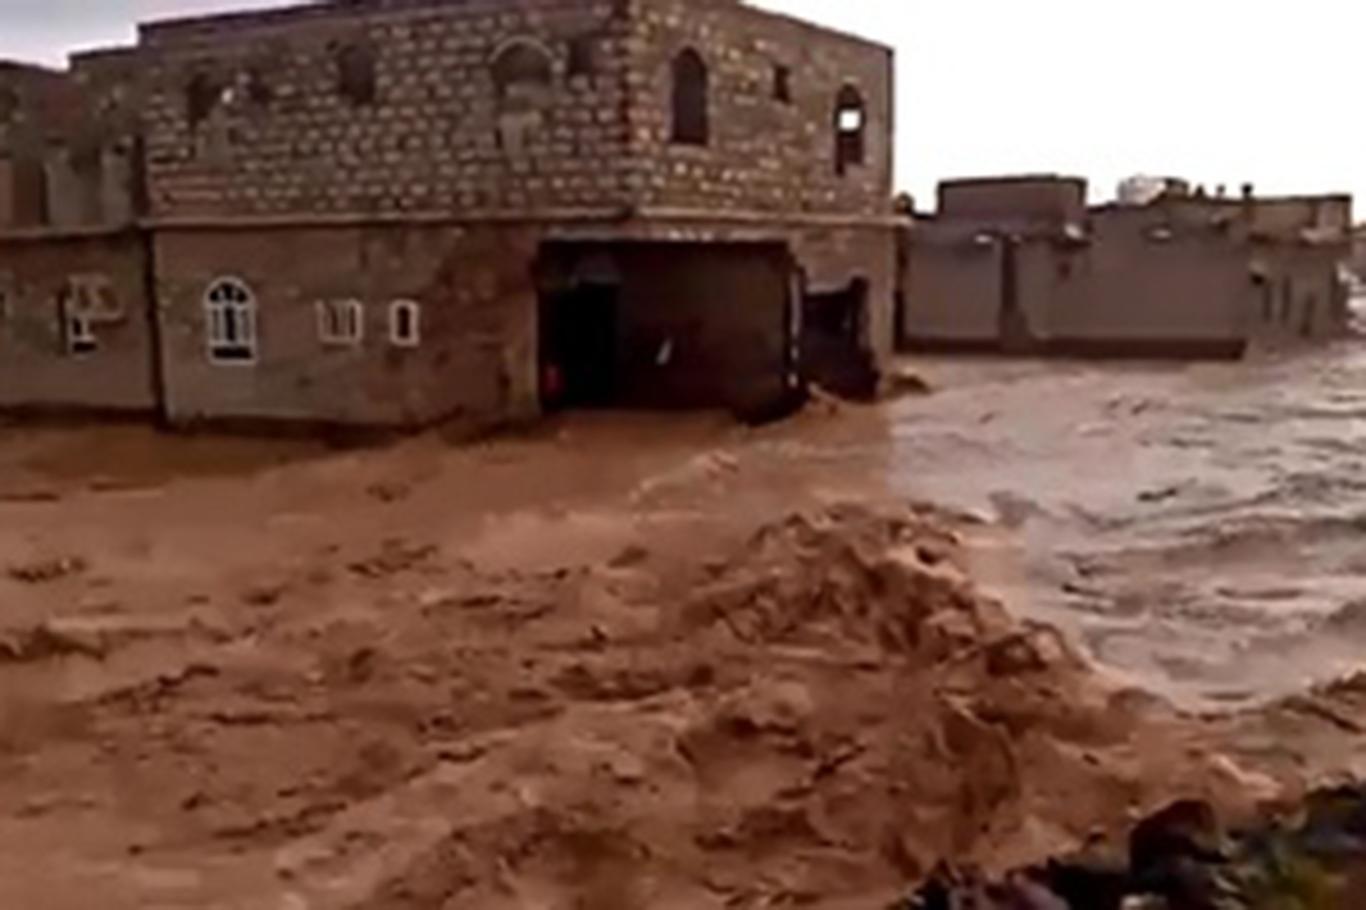 UN: Floods have led to the repeated displacements of more than 29,000 people in Yemen